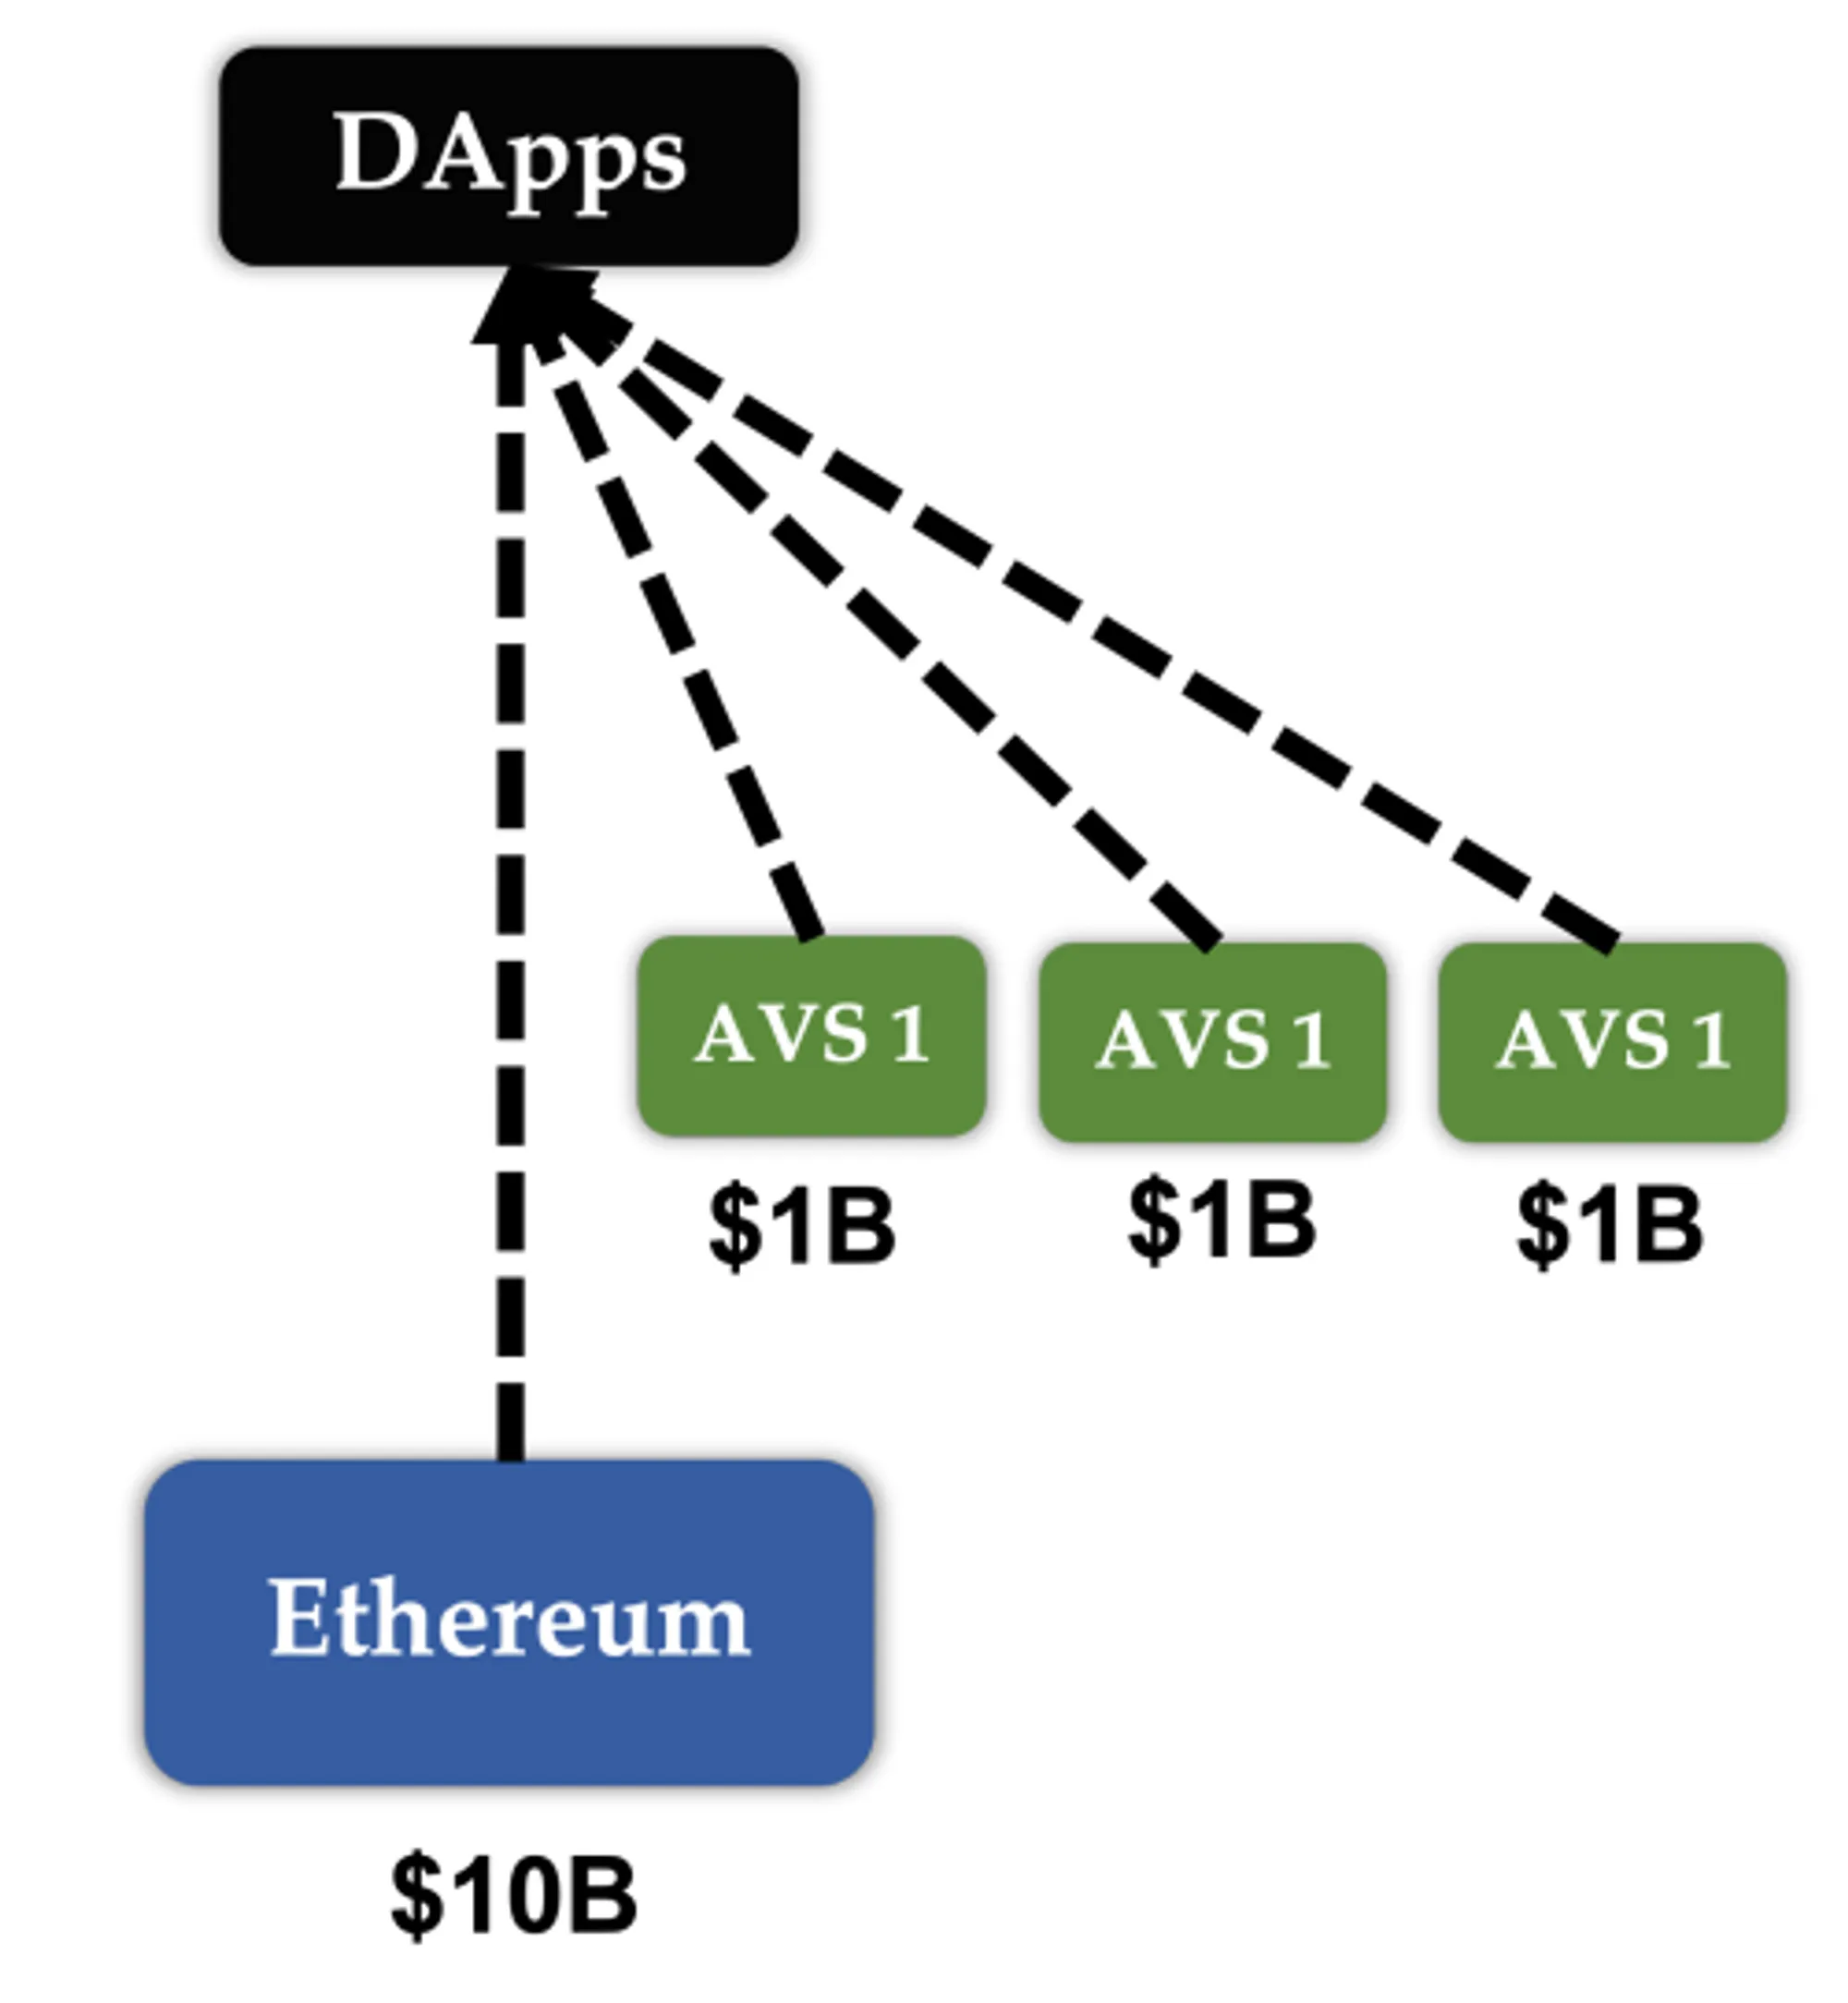 Due to the composability of DApps, a decentralized service typically includes various middleware. (https://docs.eigenlayer.xyz/whitepaper.pdf)